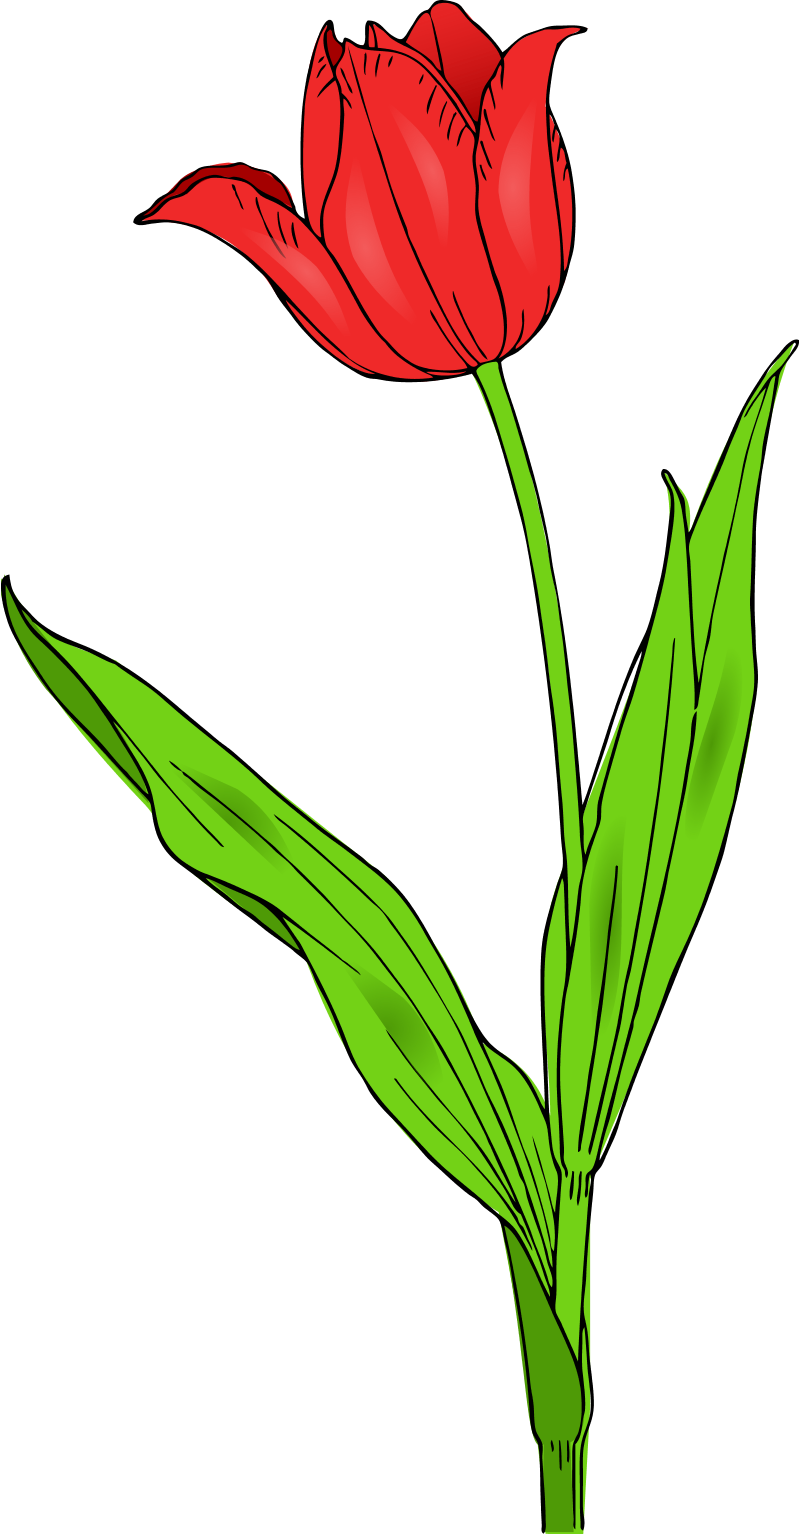 Colored Tulip Spring Flowers 2011 Clip Art SVG openclipart.org ...